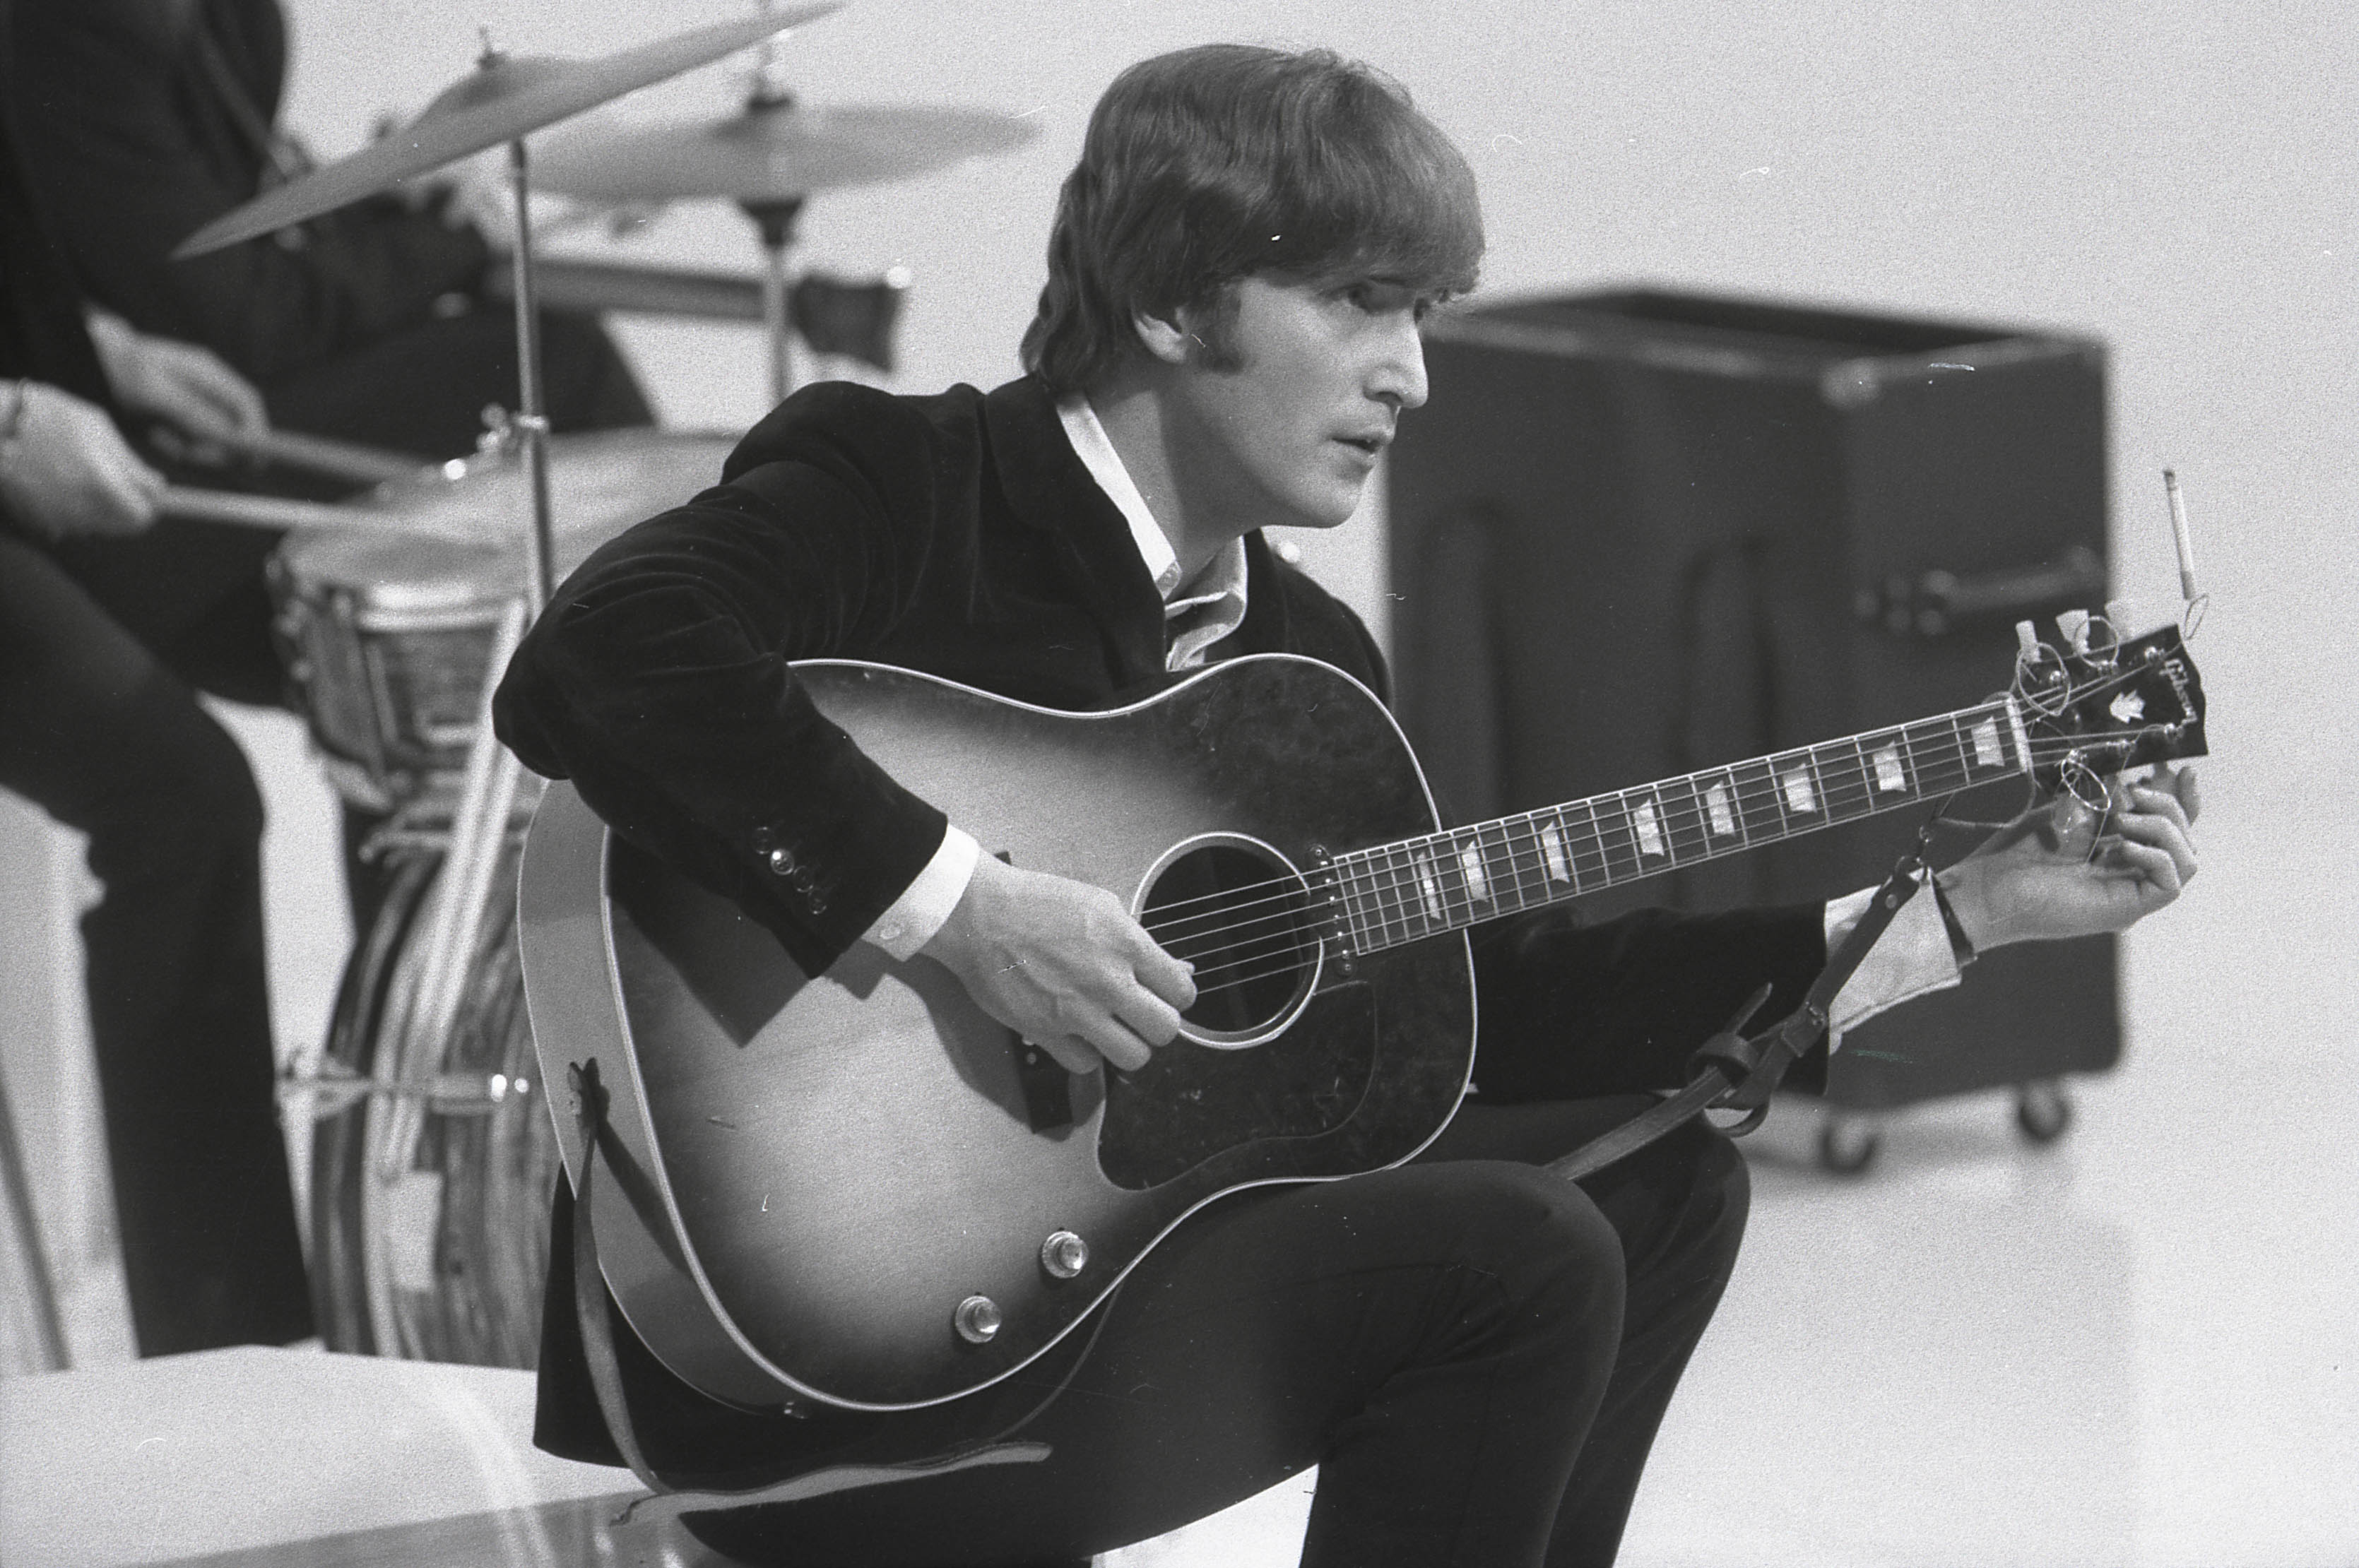 The Beatles' John Lennon holding a guitar during the "In My Life" era